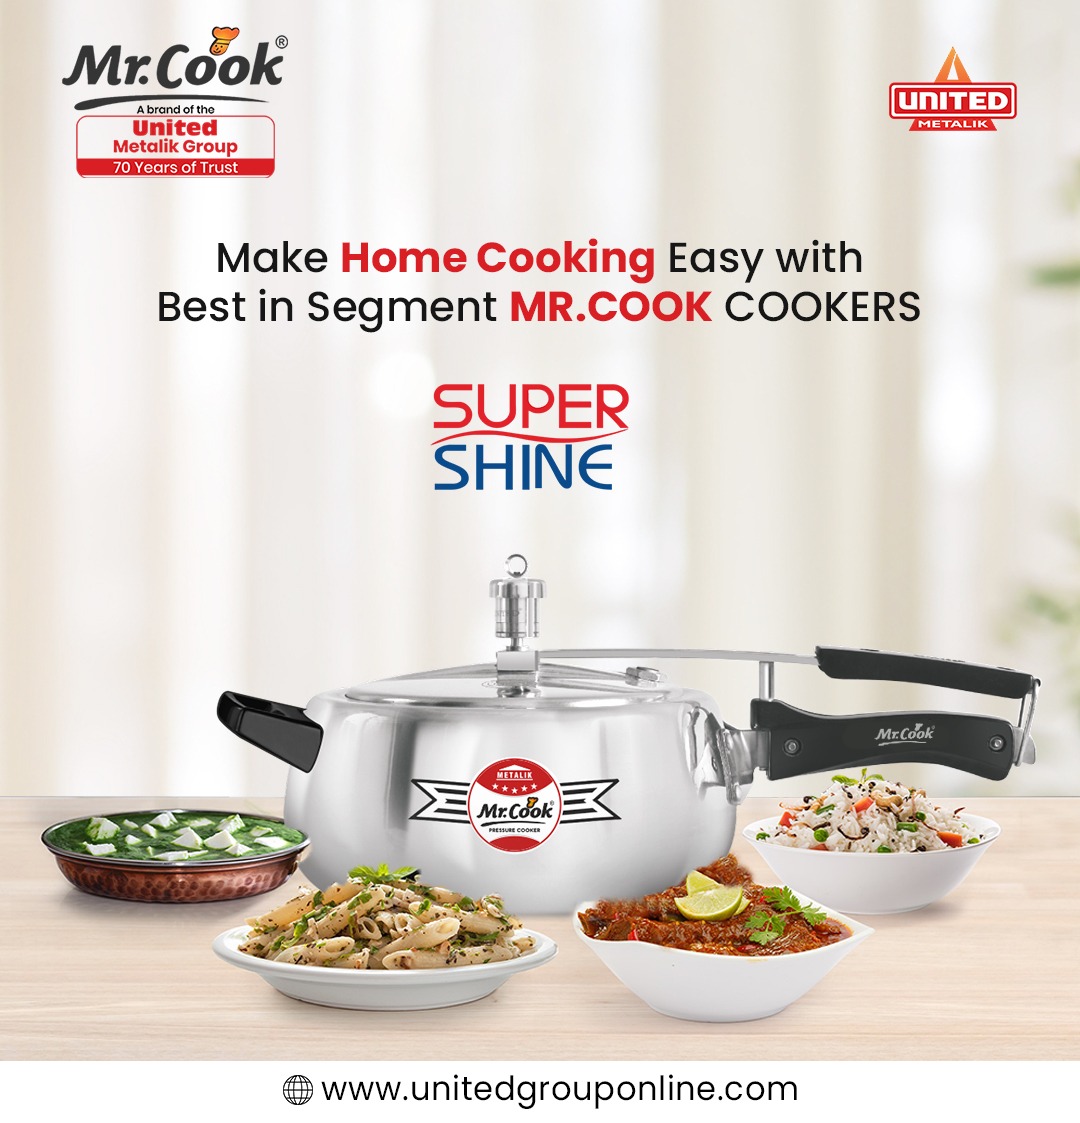 Make home cooking easy with best in segment MR. COOK cookers.
.
 #Cookers #Cookware #PressureCookers #HealthyCooking #Deep #roundedkadai
#RoundedTawa #Wok #Stwe #Pot #StainlessSteel
#Durable #Reliable #PremiumQuality #Tastyfood #Chefchoice
#Qualityproduct #Customersatisfaction